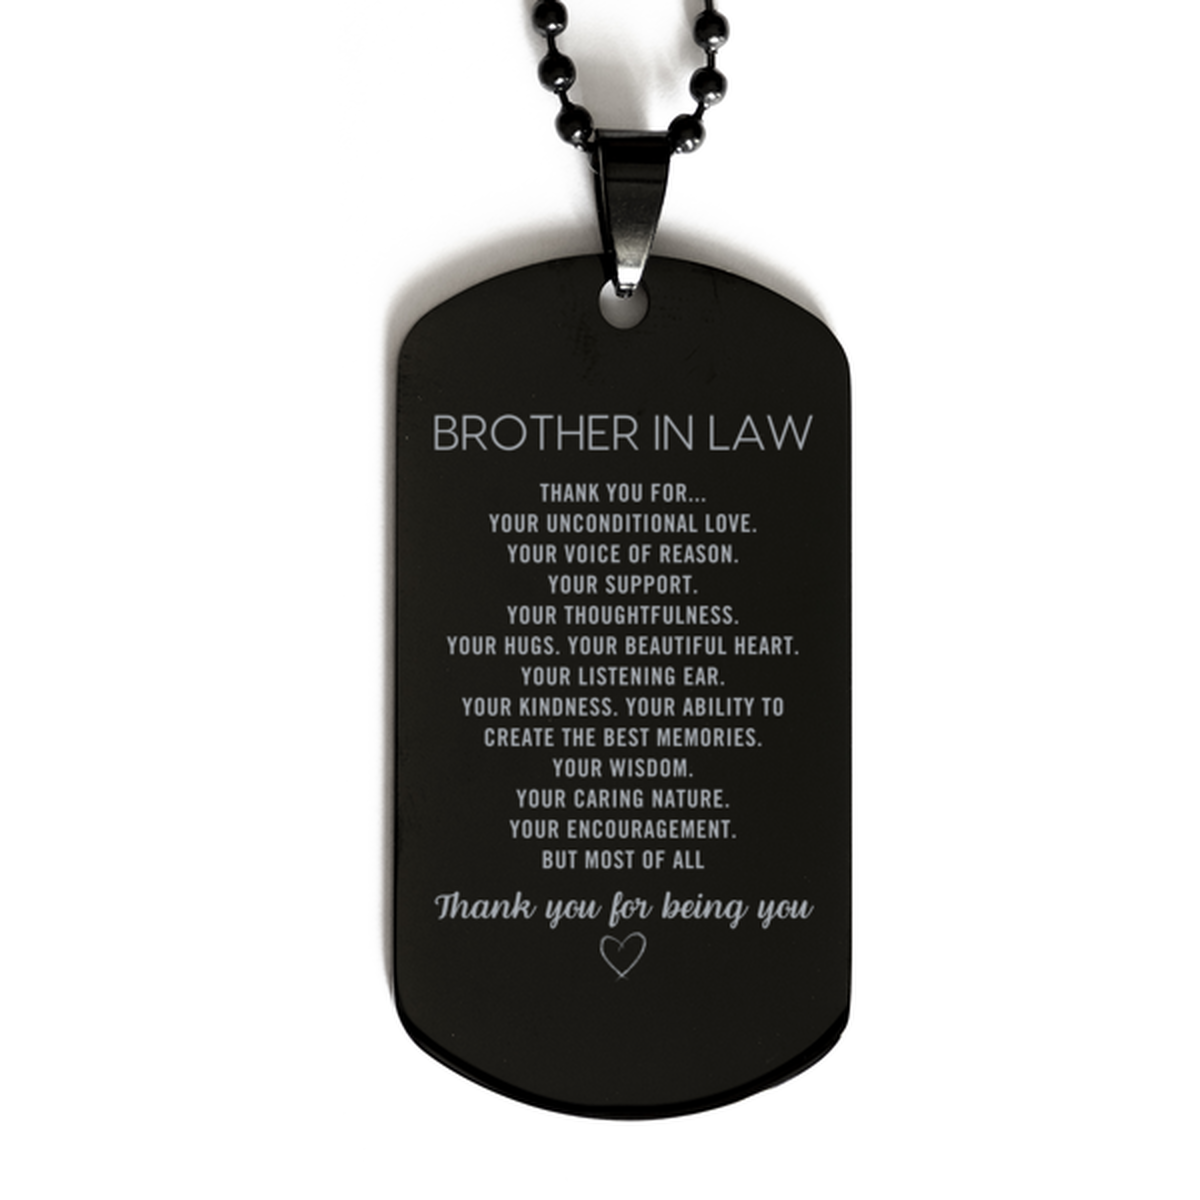 Brother In Law Black Dog Tag Custom, Engraved Gifts For Brother In Law Christmas Graduation Birthday Gifts for Men Women Brother In Law Thank you for Your unconditional love